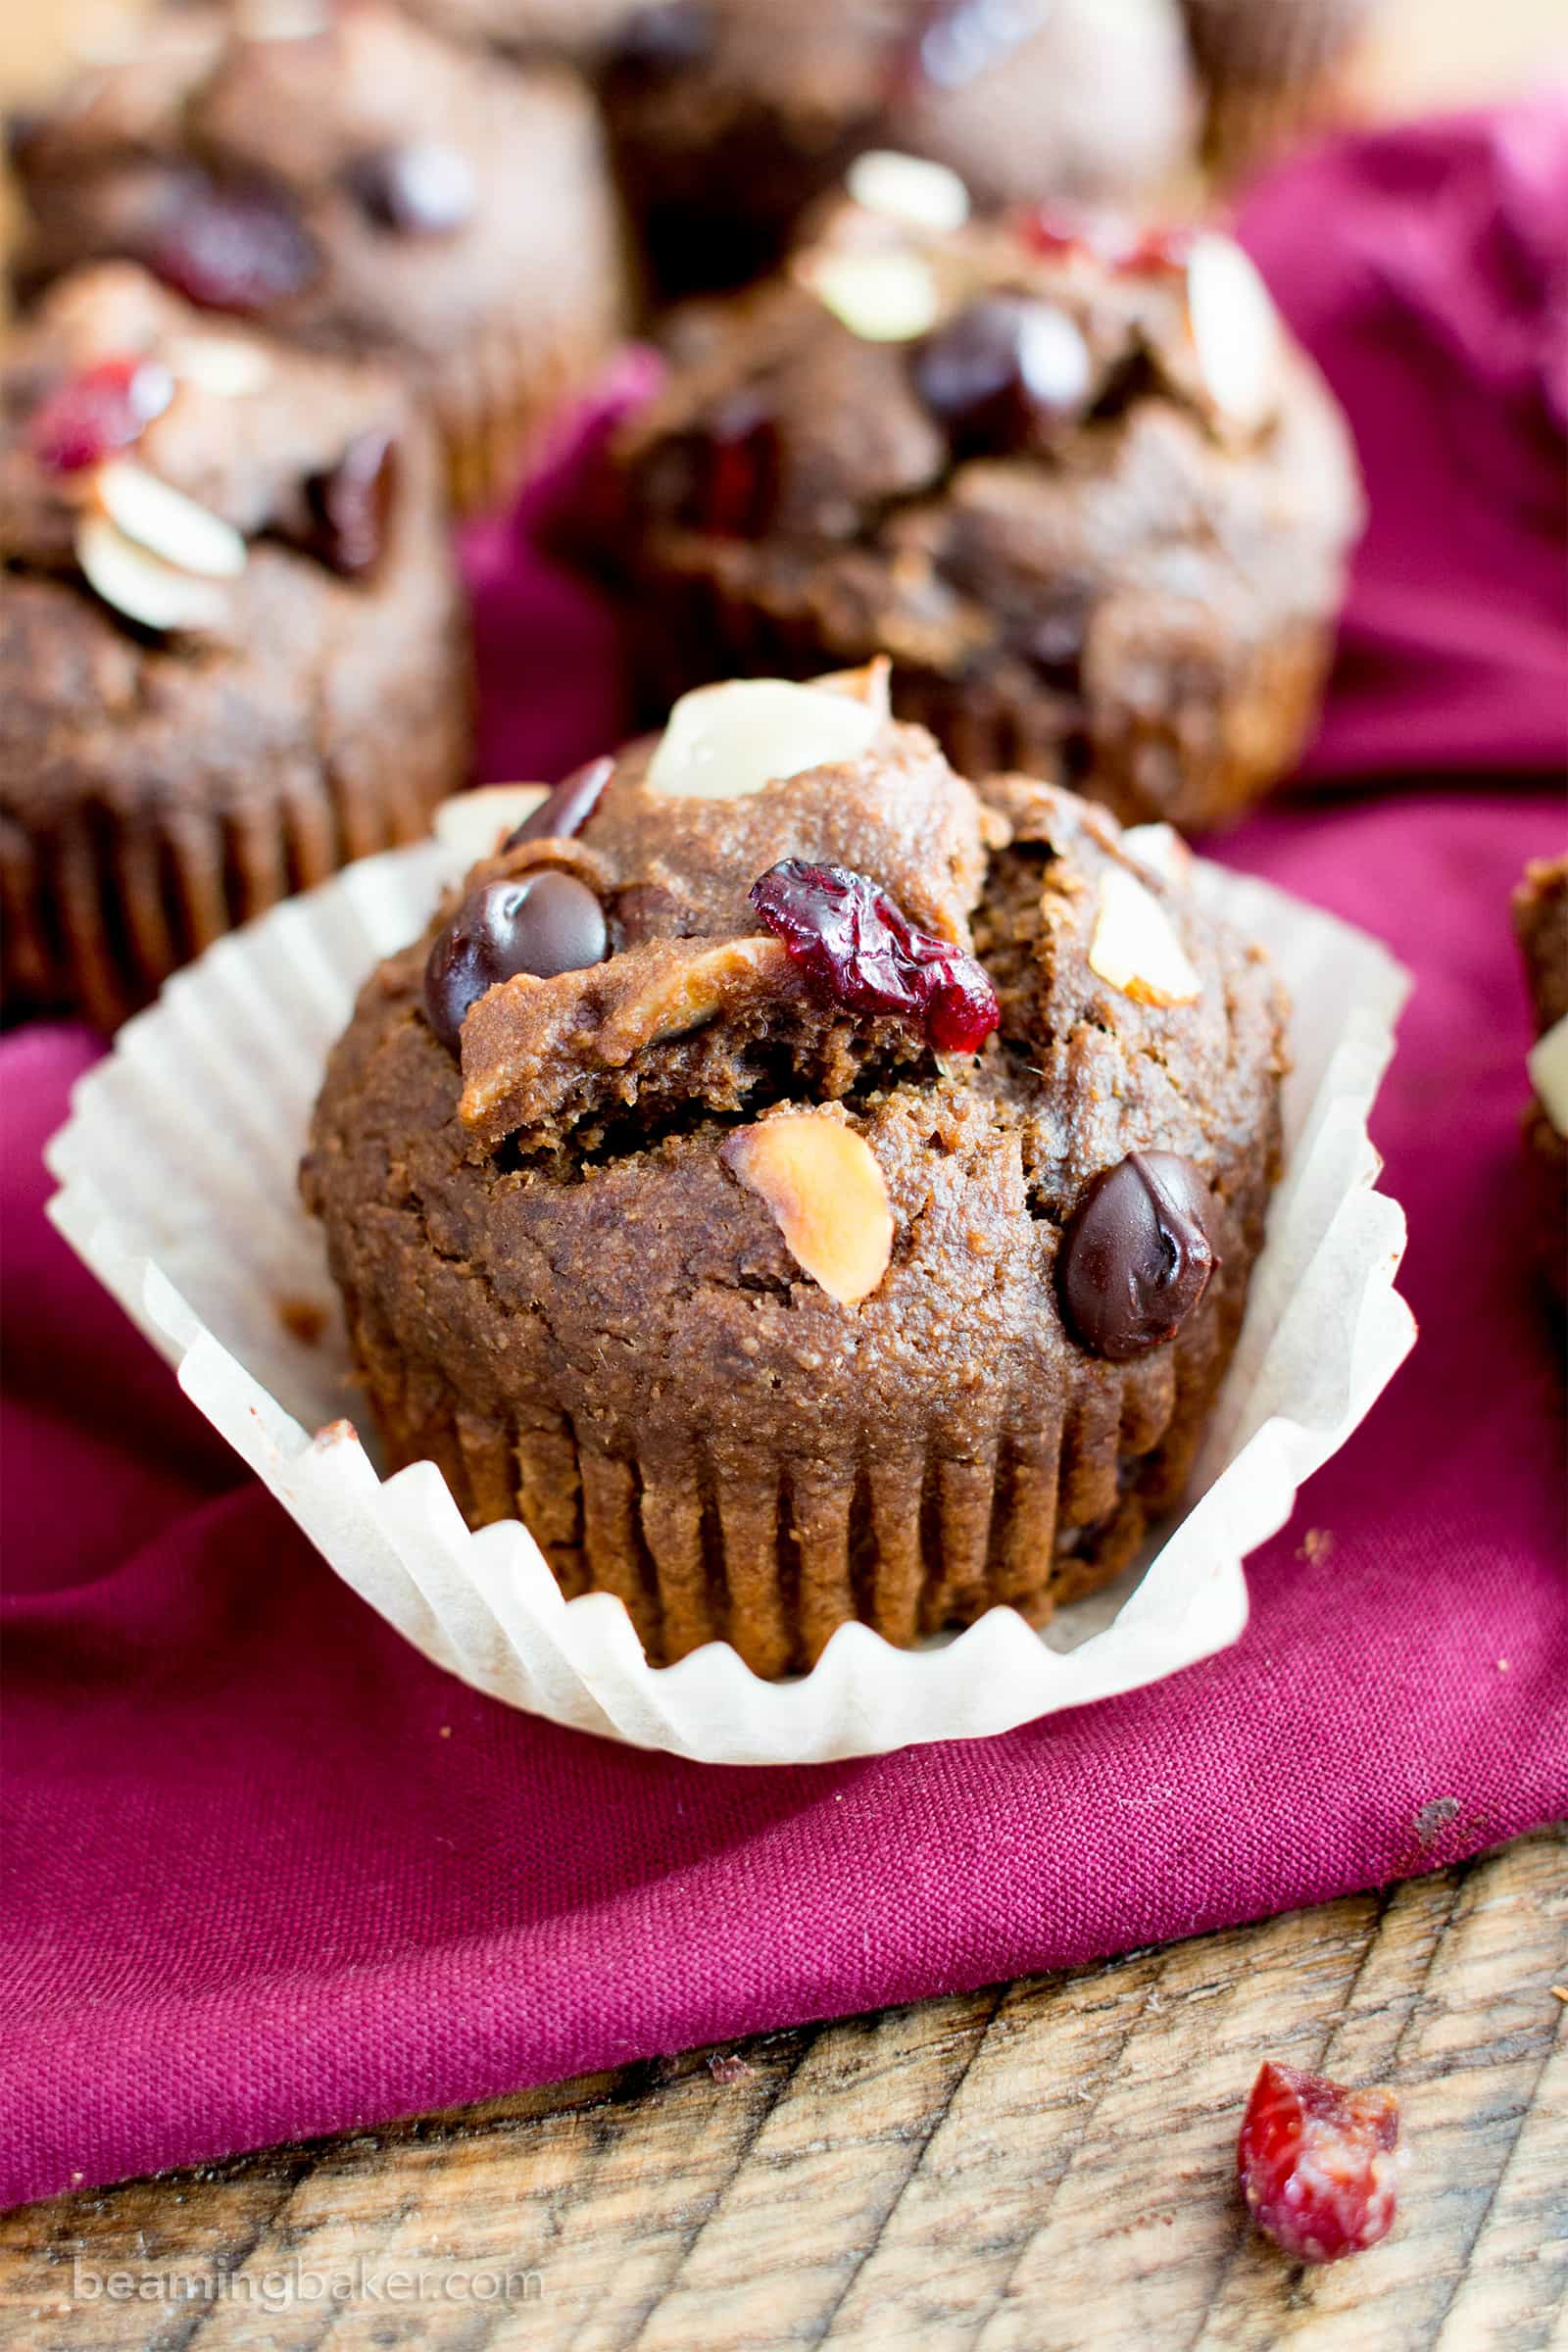 Chocolate Cranberry Almond Banana Muffins Recipe (V, GF): delightfully warm and cozy chocolate banana muffins packed with juicy cranberries and almonds. #Vegan #GlutenFree #DairyFree #Healthy #OneBowl | BeamingBaker.com